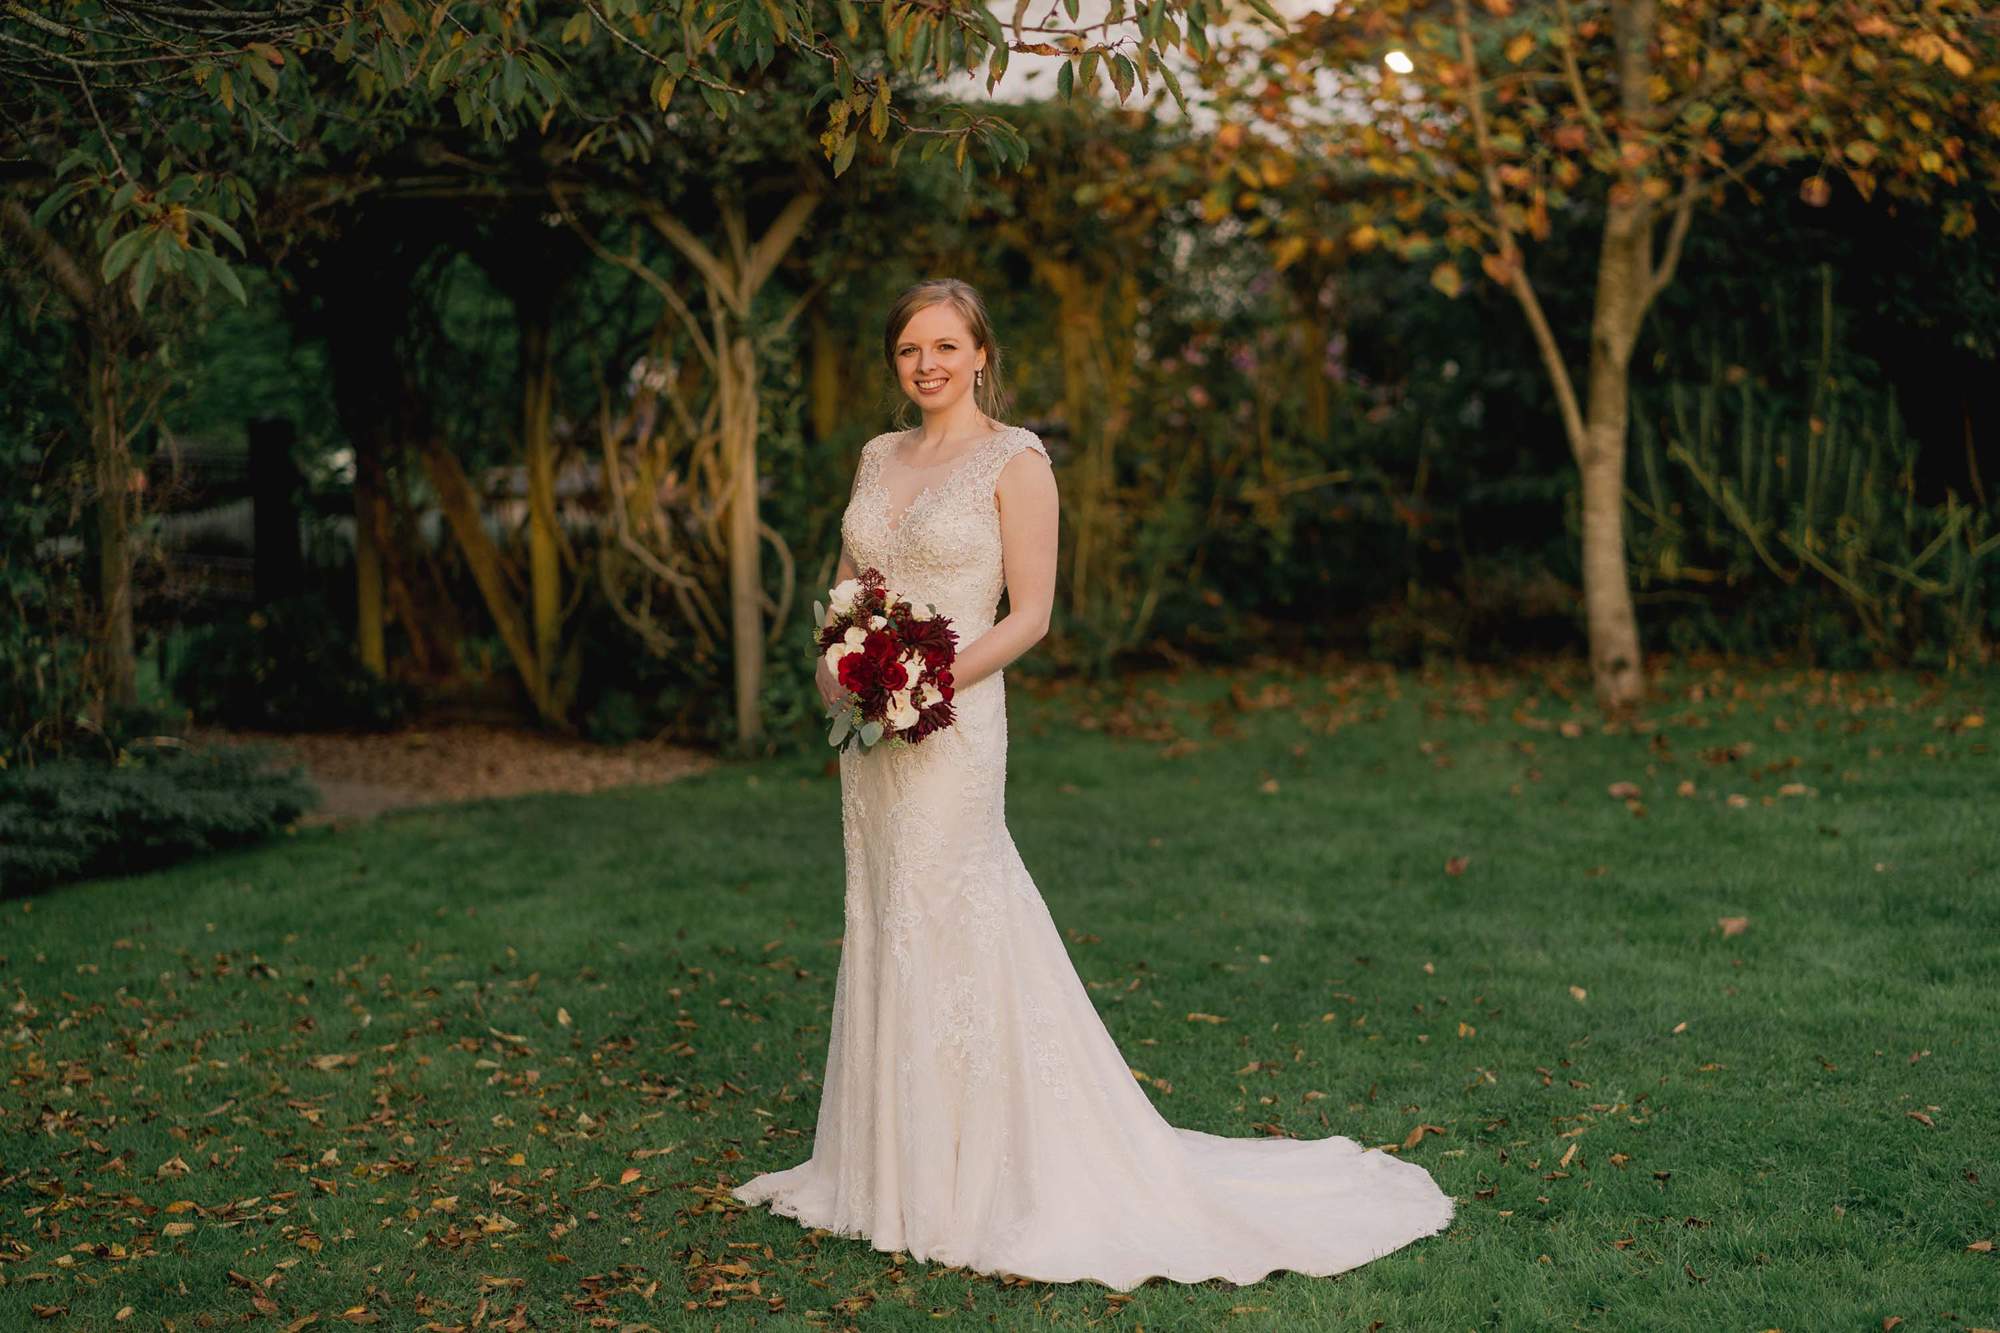 Bride holding her bouquet of red flowers at Rumbolds Farms wedding venue in Billingshurst, Sussex.